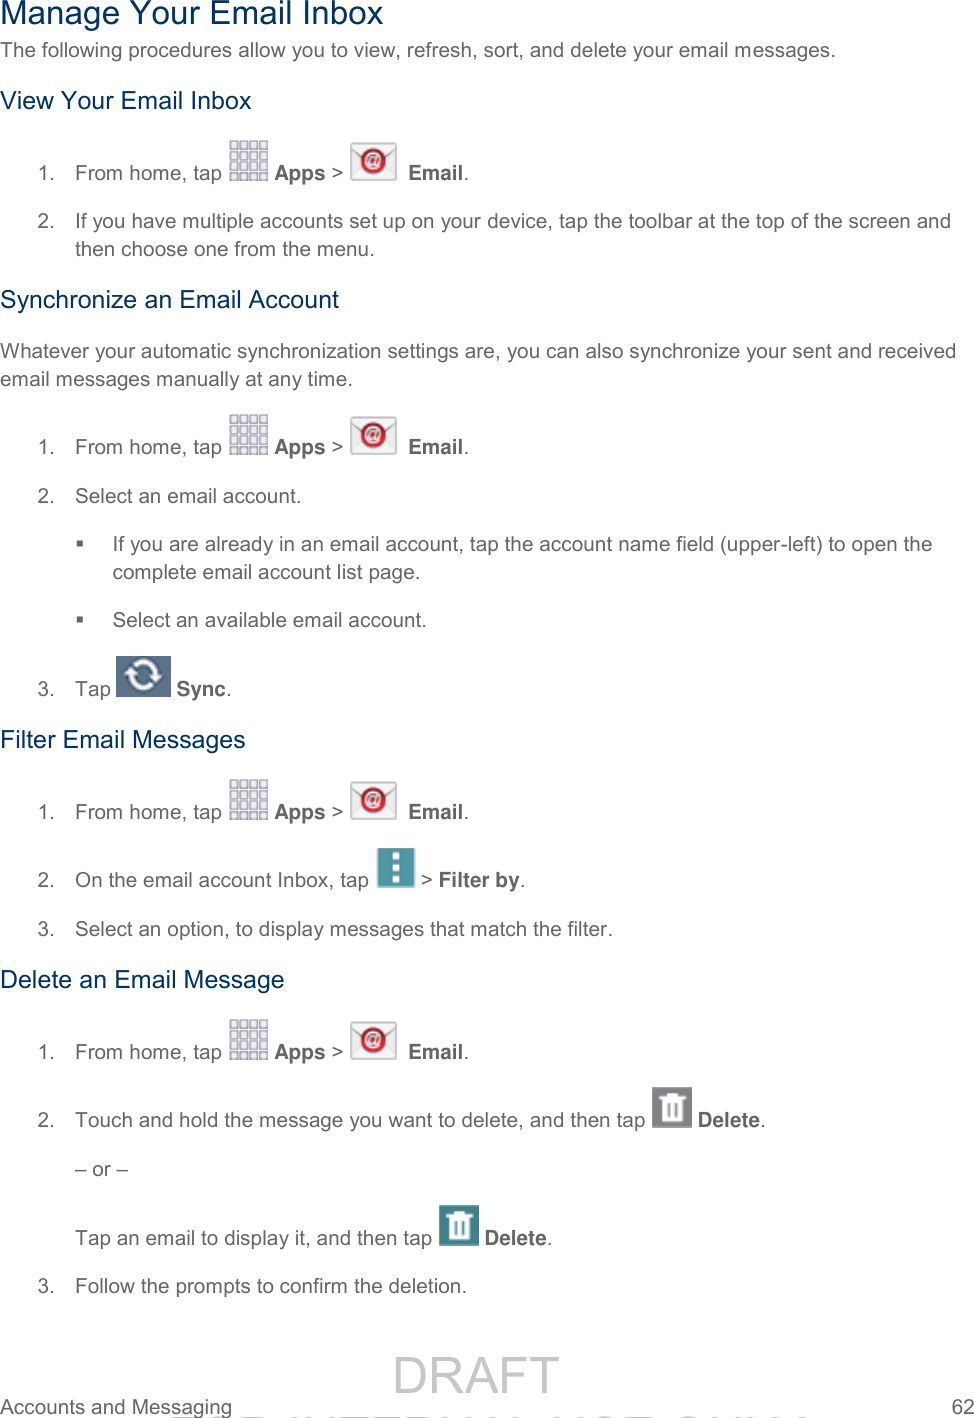                 DRAFT FOR INTERNAL USE ONLY Accounts and Messaging  62   Manage Your Email Inbox The following procedures allow you to view, refresh, sort, and delete your email messages. View Your Email Inbox 1.  From home, tap   Apps &gt;    Email. 2.  If you have multiple accounts set up on your device, tap the toolbar at the top of the screen and then choose one from the menu. Synchronize an Email Account Whatever your automatic synchronization settings are, you can also synchronize your sent and received email messages manually at any time. 1.  From home, tap   Apps &gt;    Email. 2.  Select an email account.    If you are already in an email account, tap the account name field (upper-left) to open the complete email account list page.   Select an available email account.  3.  Tap   Sync.  Filter Email Messages 1.  From home, tap   Apps &gt;    Email. 2.  On the email account Inbox, tap  &gt; Filter by. 3.  Select an option, to display messages that match the filter. Delete an Email Message 1.  From home, tap   Apps &gt;    Email. 2.  Touch and hold the message you want to delete, and then tap   Delete. – or – Tap an email to display it, and then tap   Delete. 3.  Follow the prompts to confirm the deletion. 